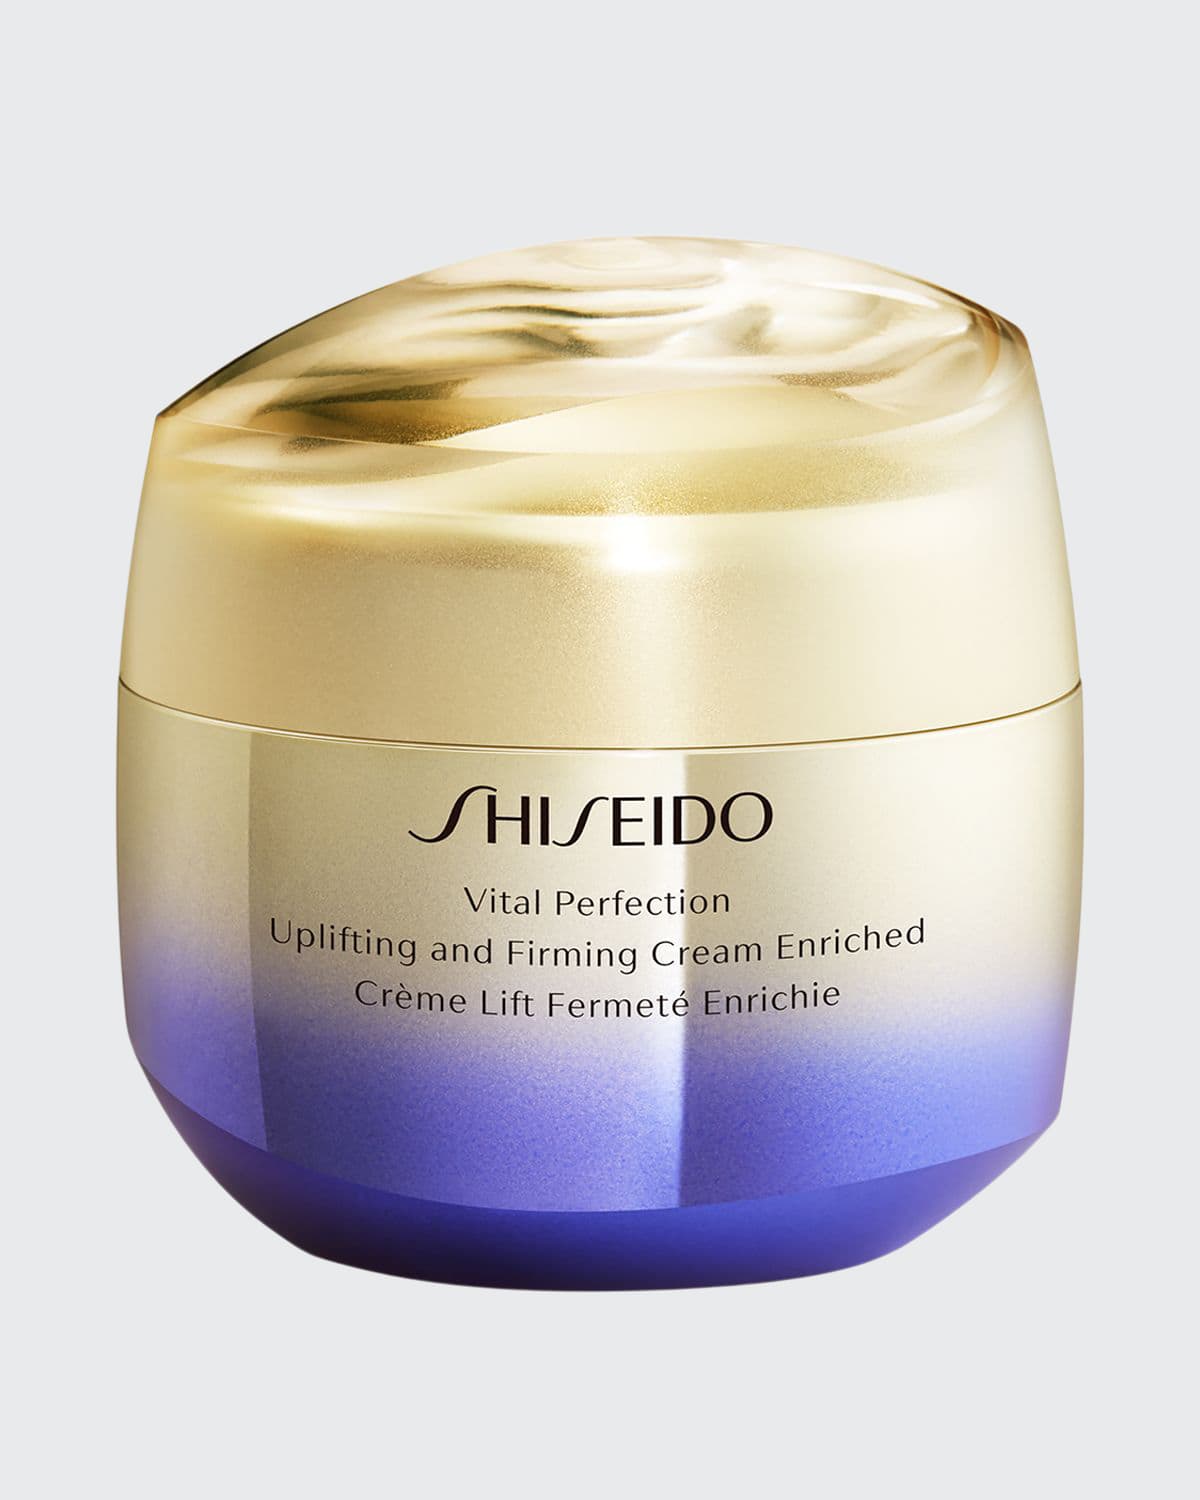 Vital Perfection Uplifting & Firming Cream Enriched, 2.6 oz.